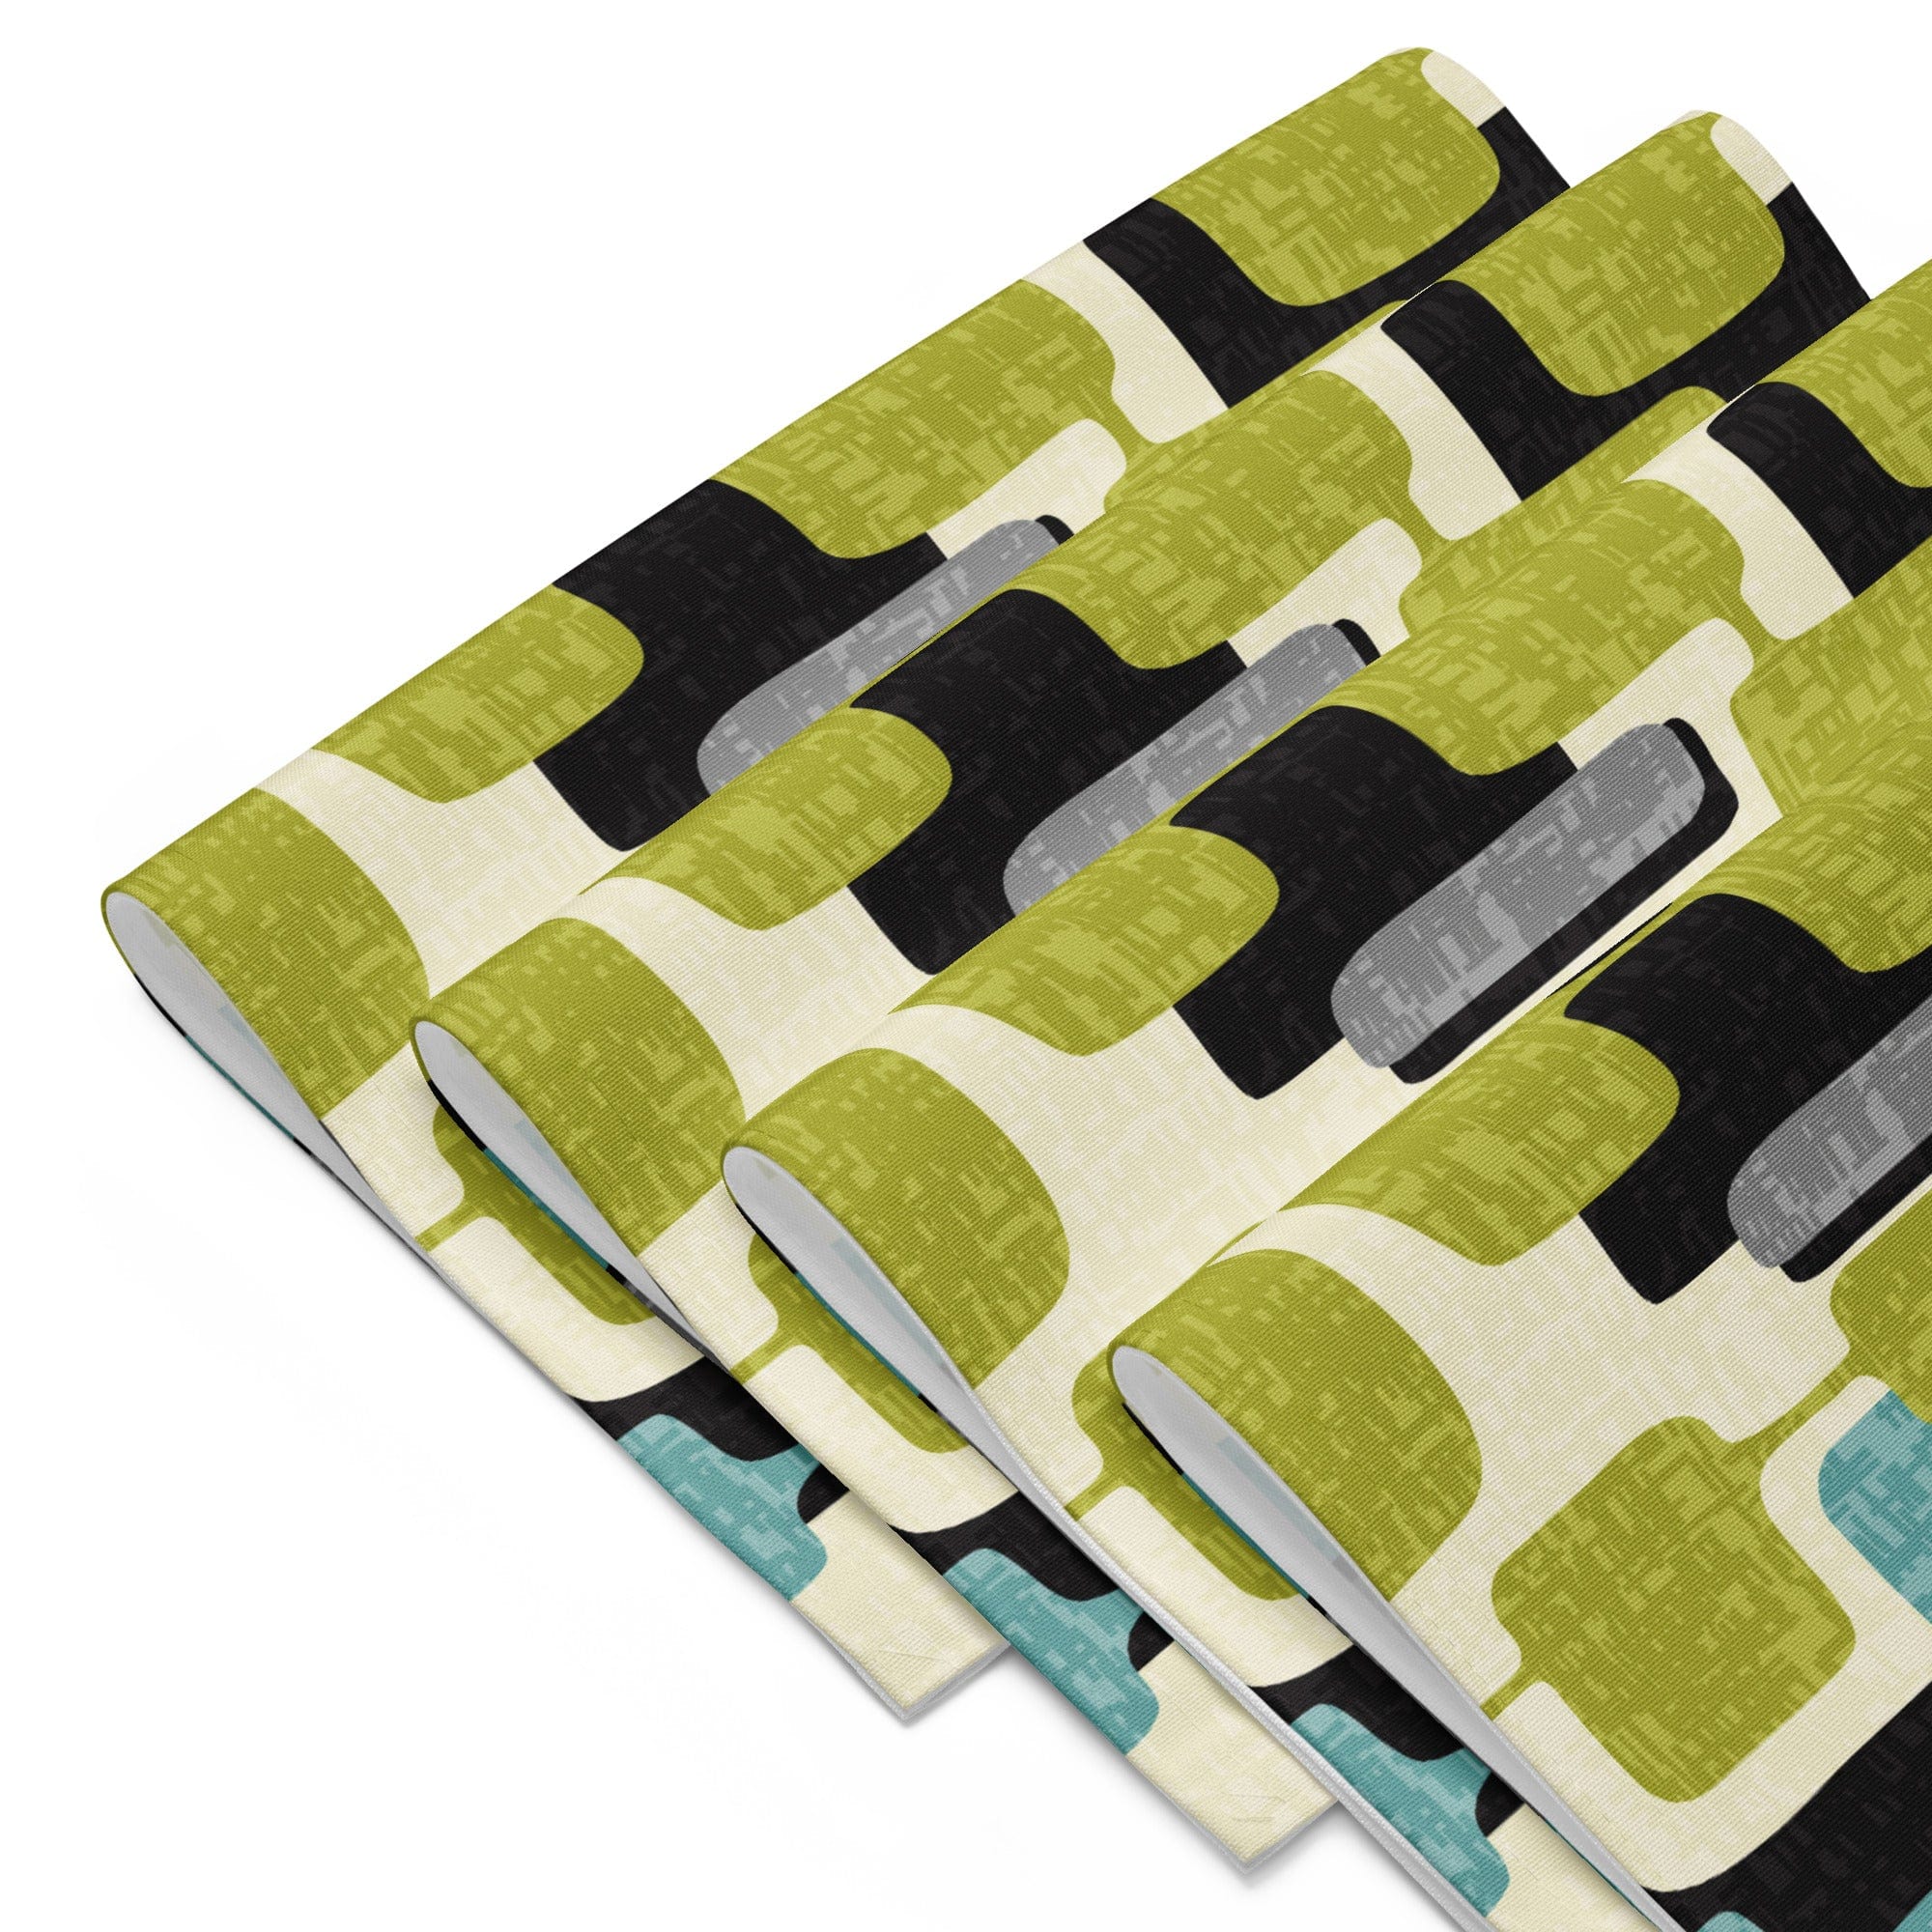 Kate McEnroe New York Mid Century Modern Placemats, Set of 4, MCM 60s Geometric Abstract Table Mats, Retro Dining Linens Placemats 7857804_17484